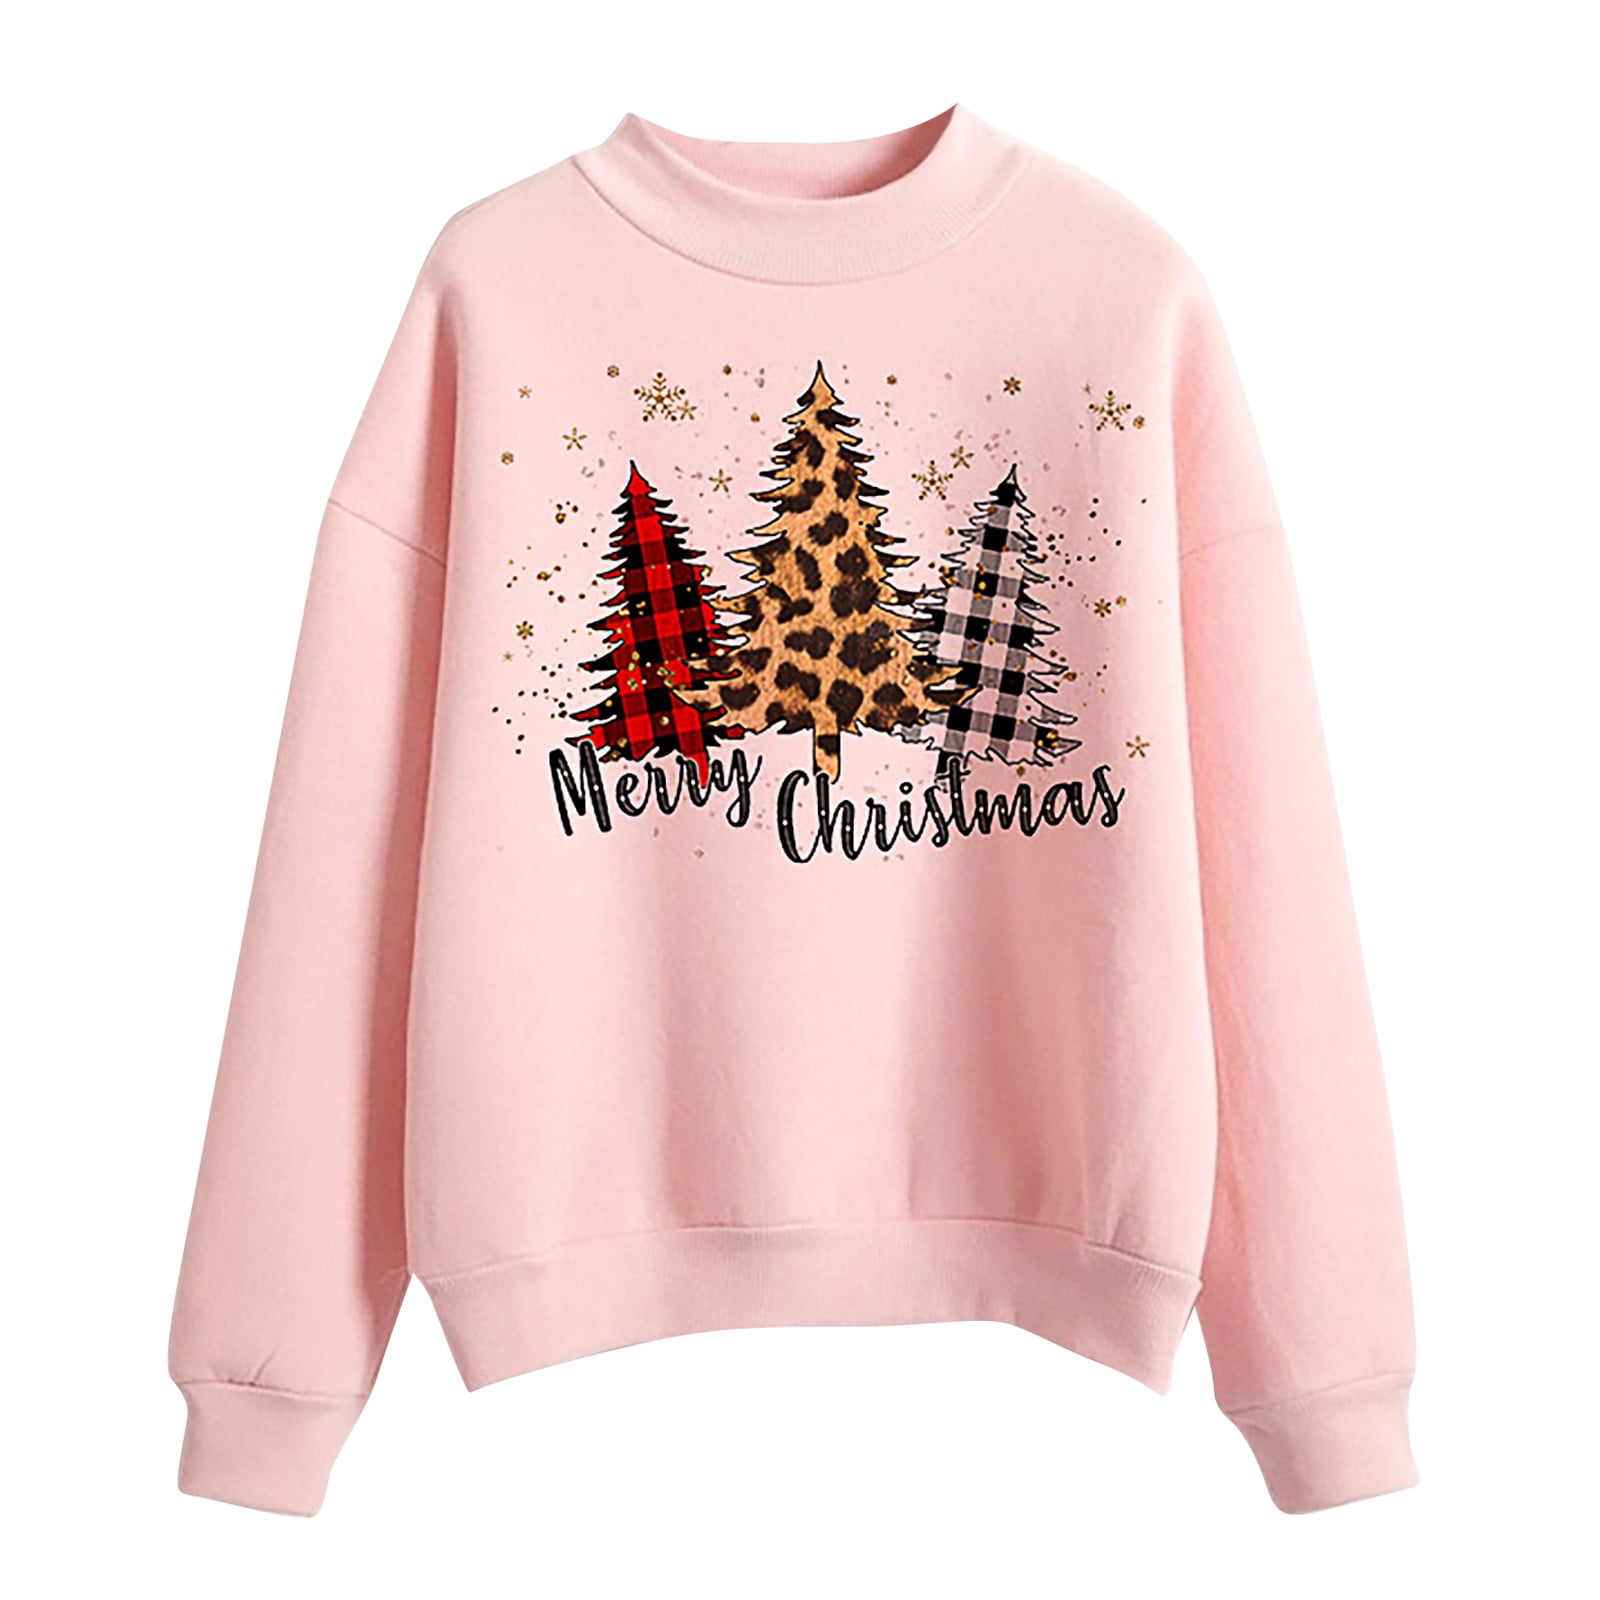 Merry Christmas Casual Turtleneck Pullover Pink Women'S Sweater Women's ...